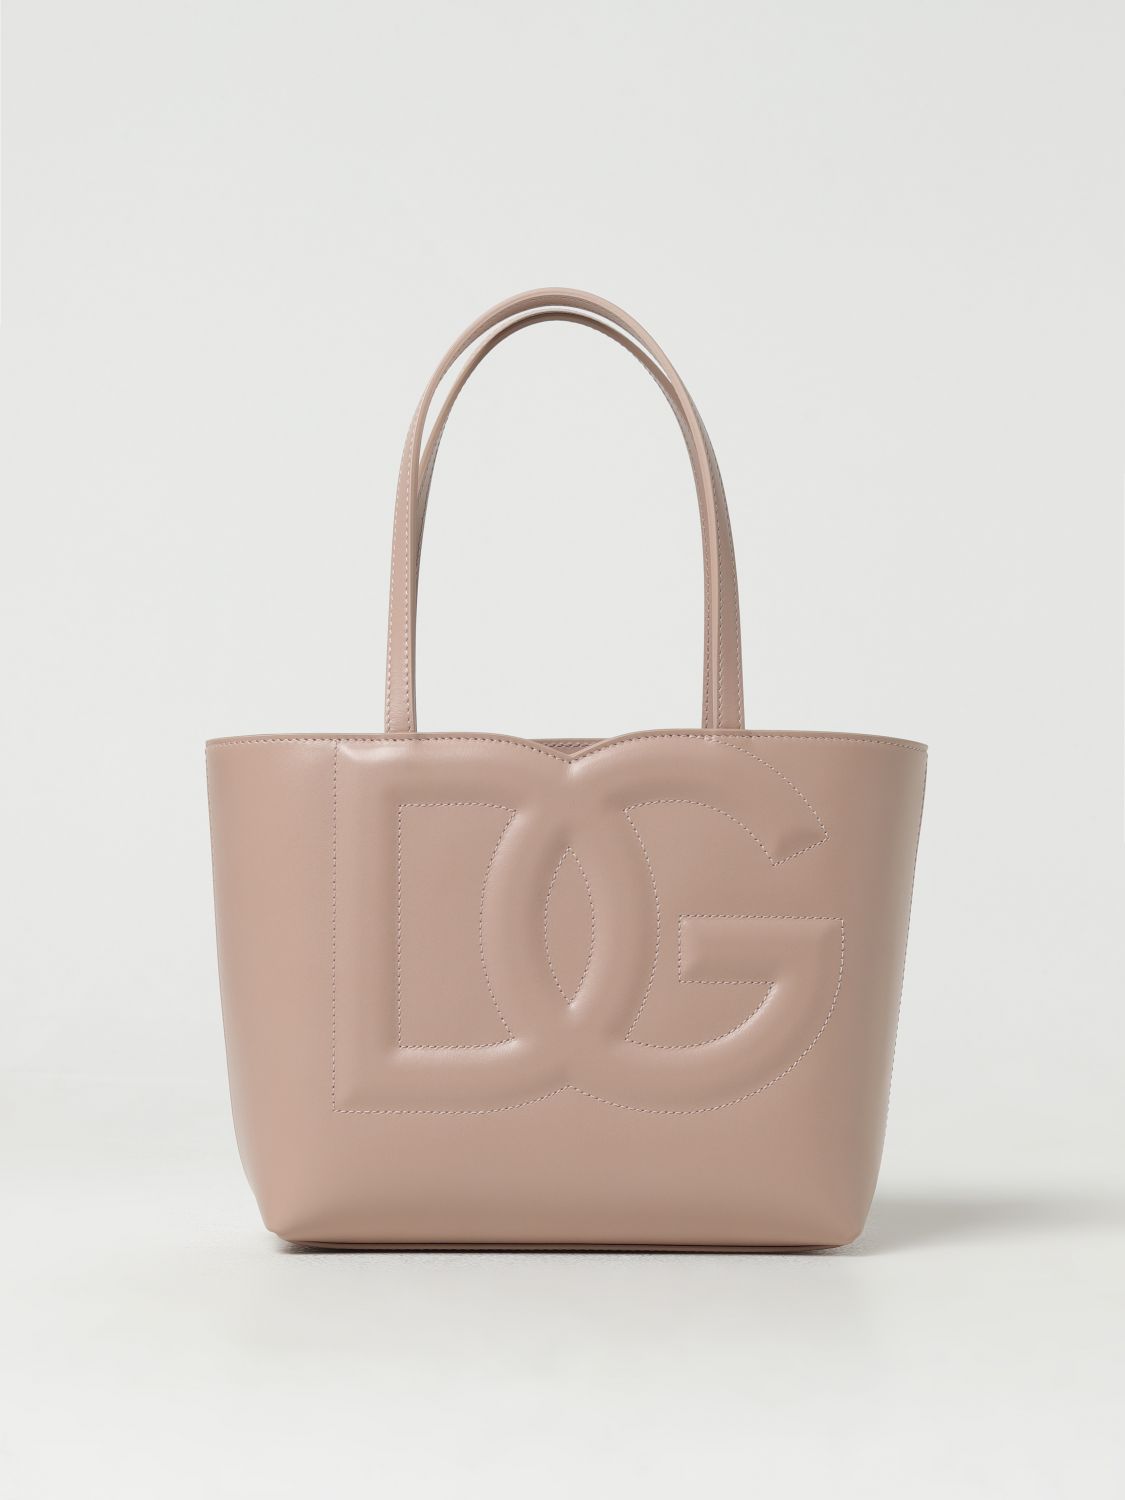 Dolce & Gabbana Bag In Leather With Monogram In Beige